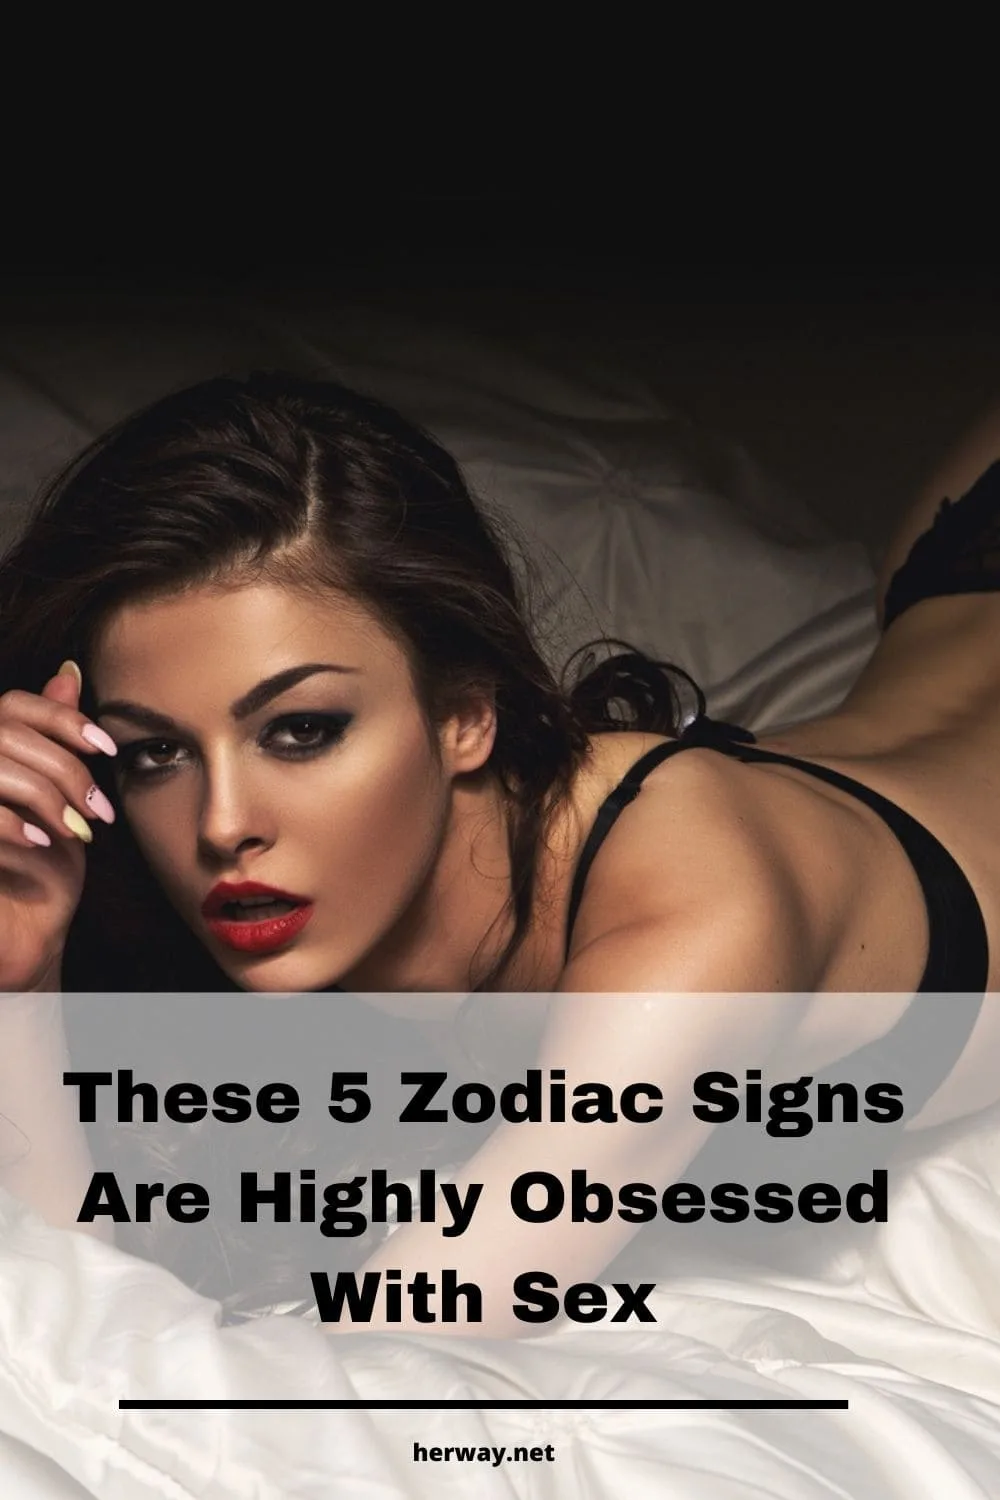 These 5 Zodiac Signs Are Highly Obsessed With Sex